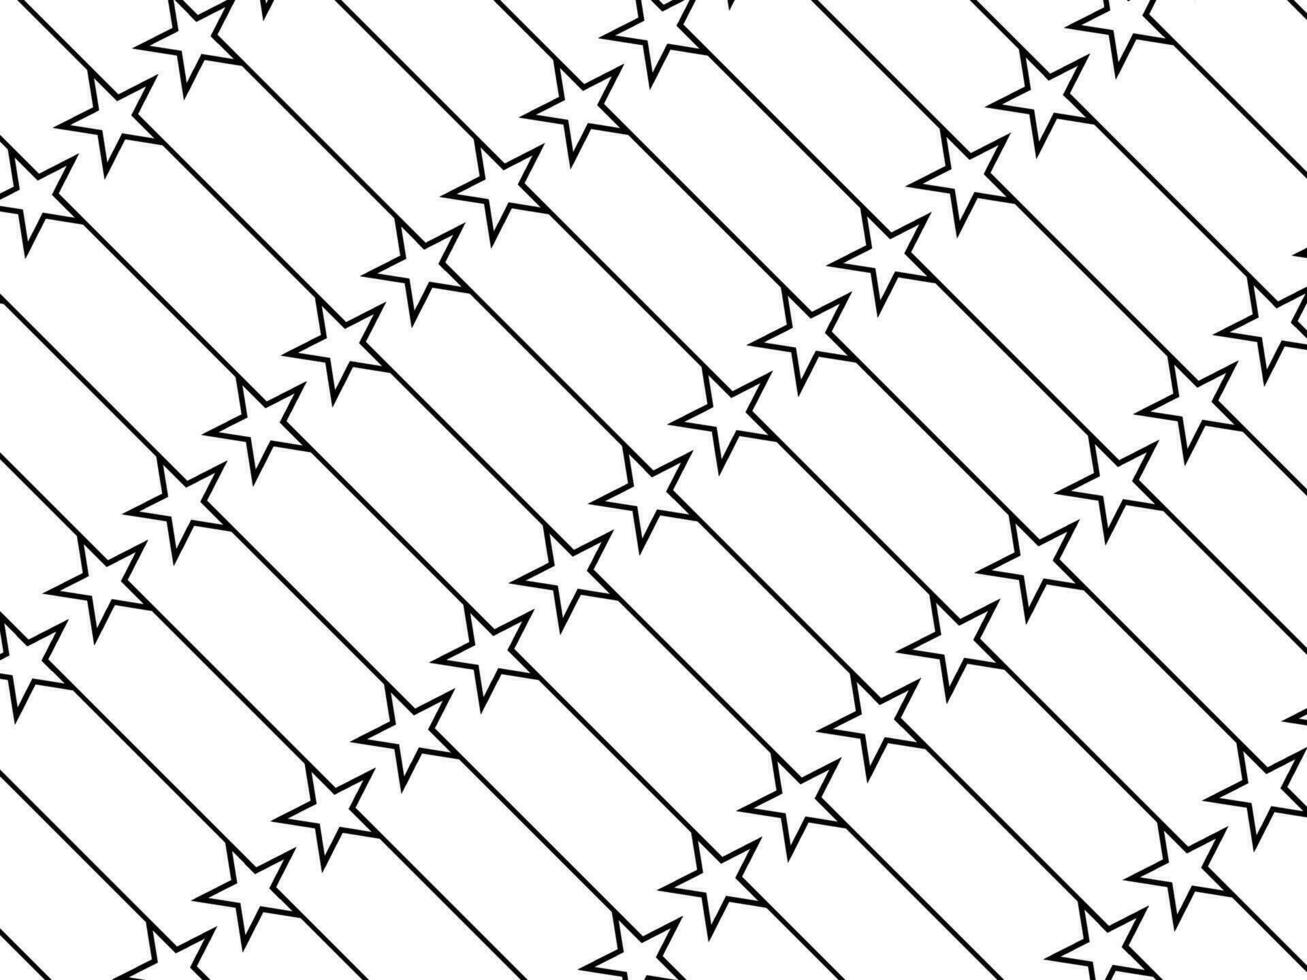 Star on the Lines Motifs Pattern. can use for Modern Decoration, Ornate, Wallpaper, Cover, Wrapping, Carpet Pattern, Tile, Fashion, Textile, or Graphic Design Element. Vector Illustration